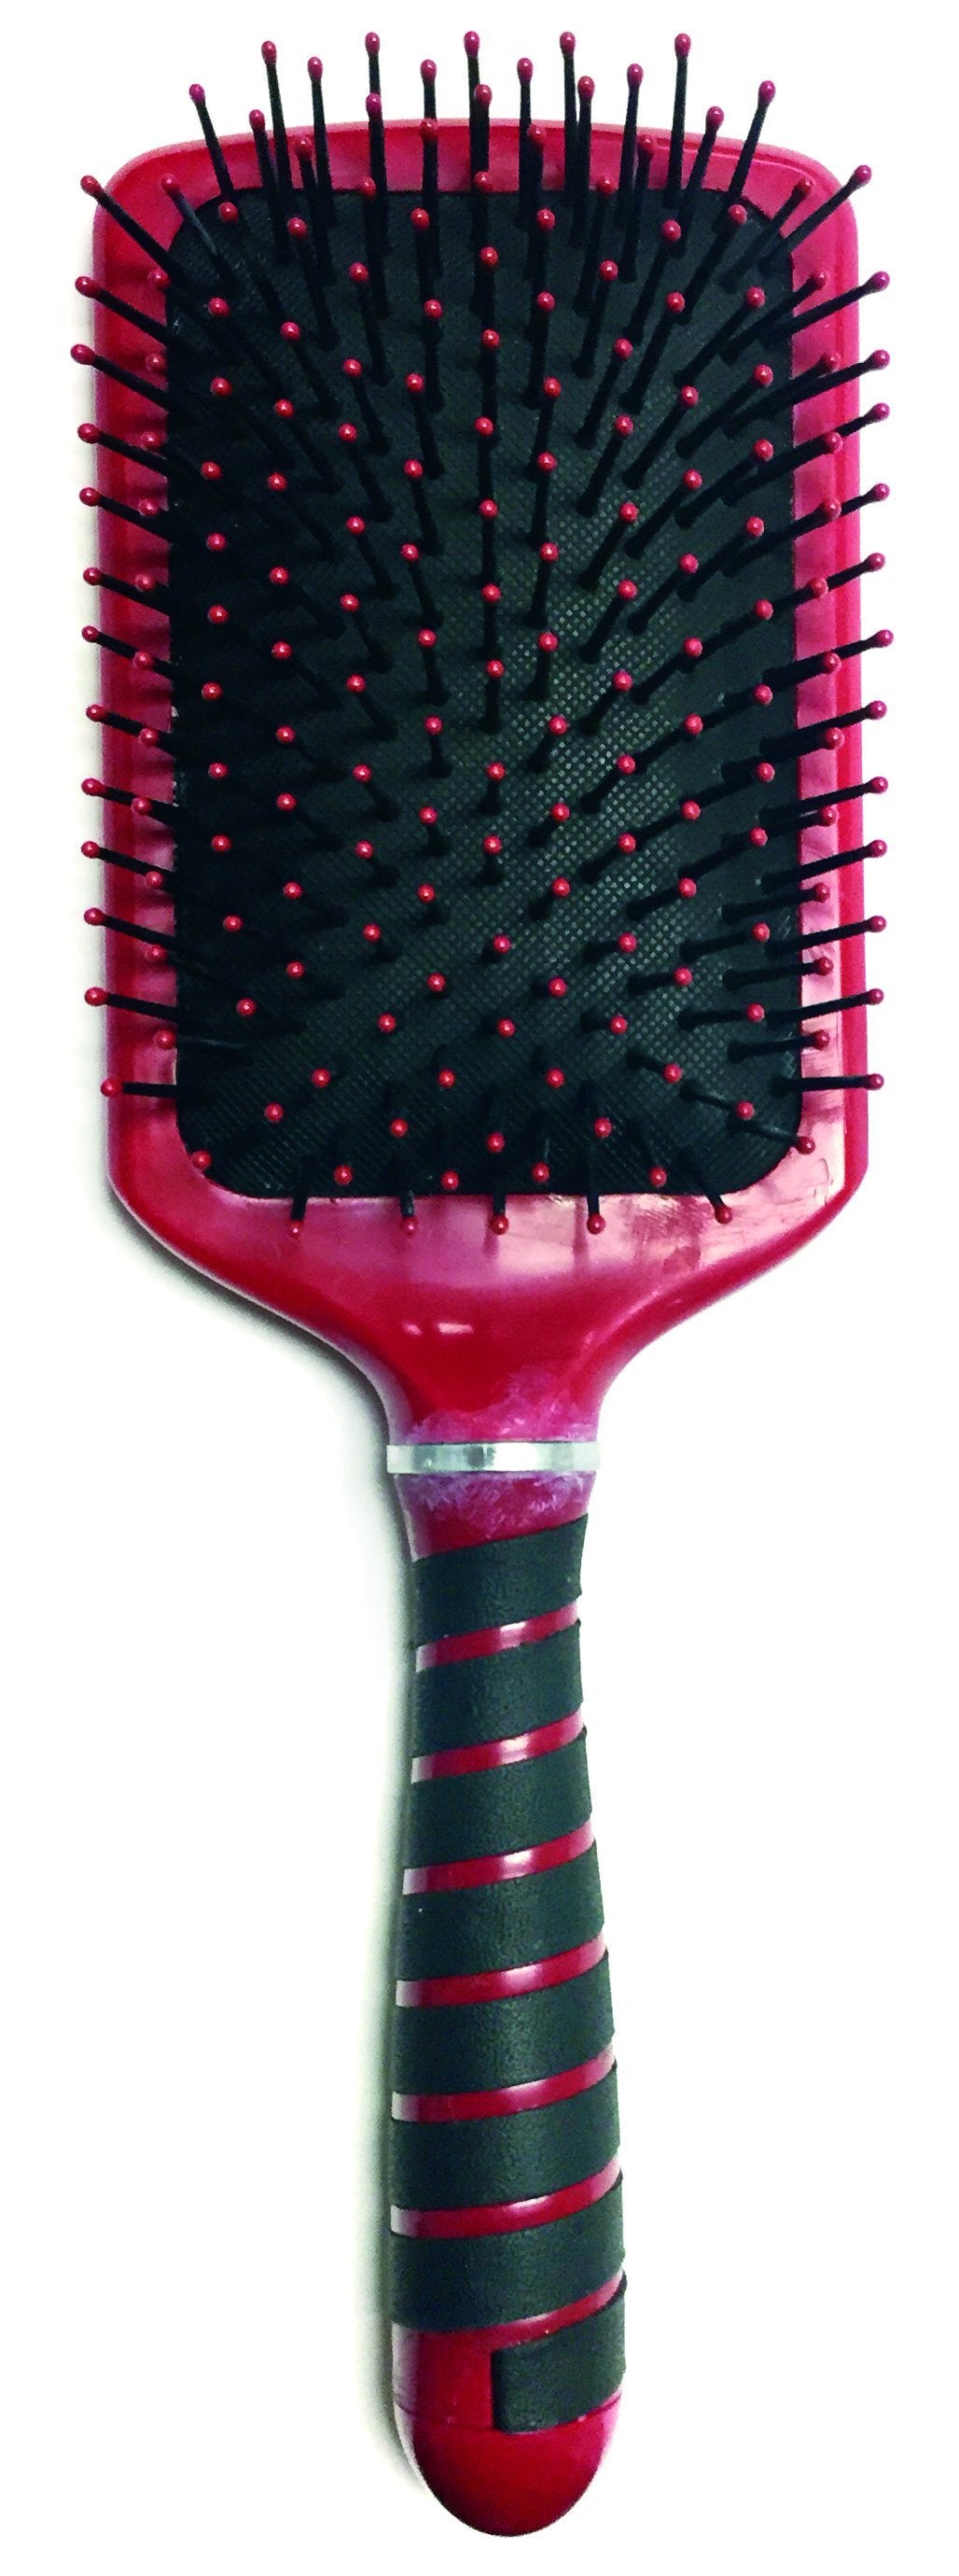 Magnetic Tourmaline Paddle Brush - iTech Collection HairArt Int'l Inc.